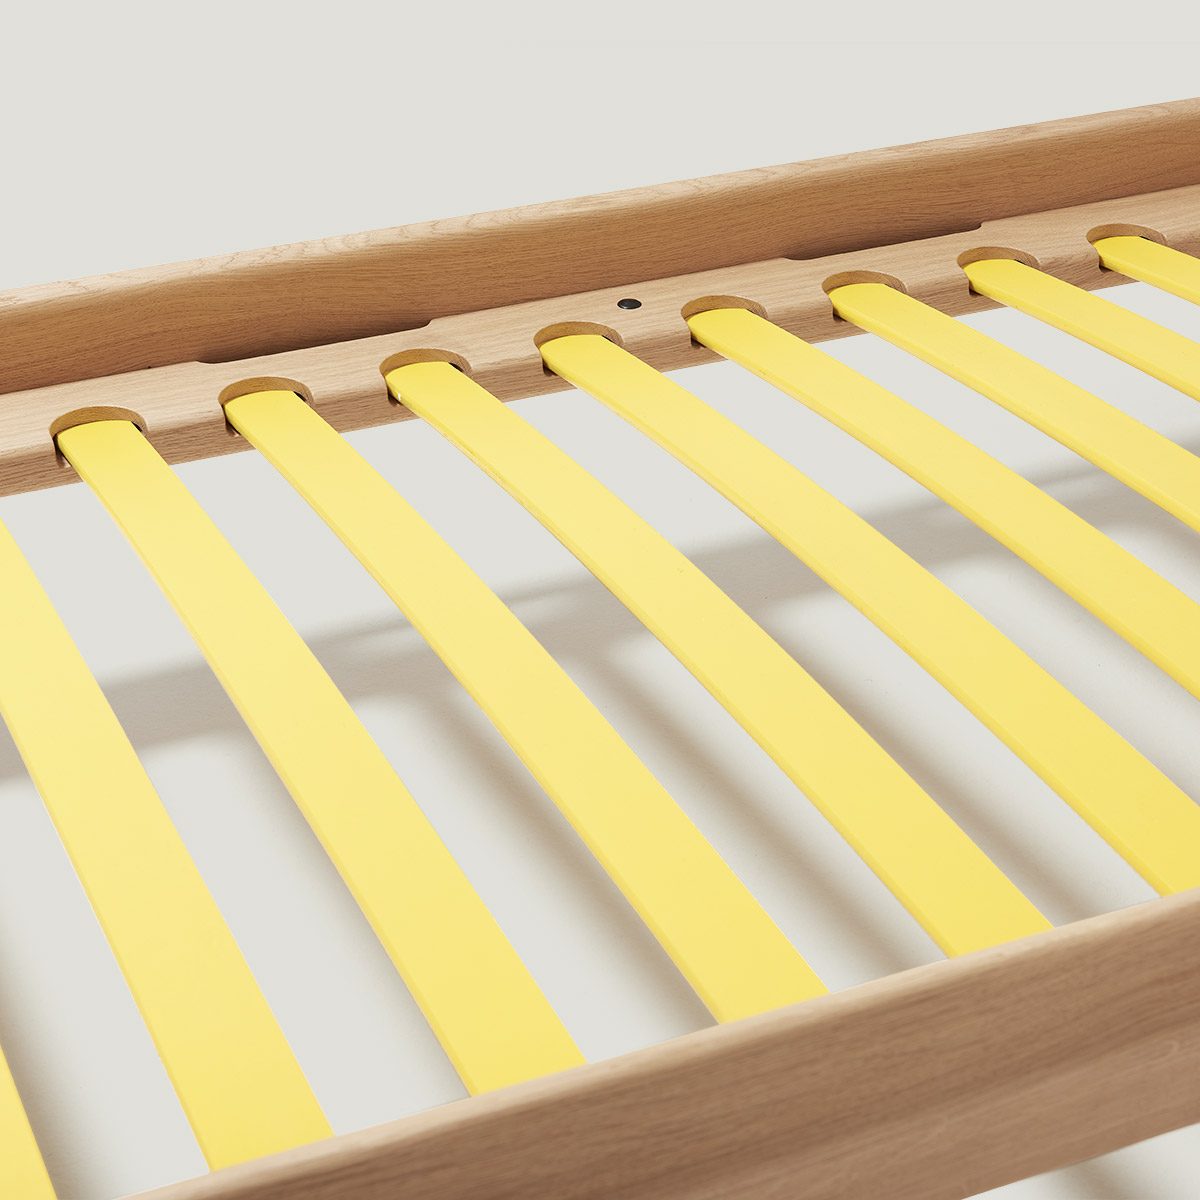 Provides best sleeping comfort: The slatted frame of VII classic and VII frame.